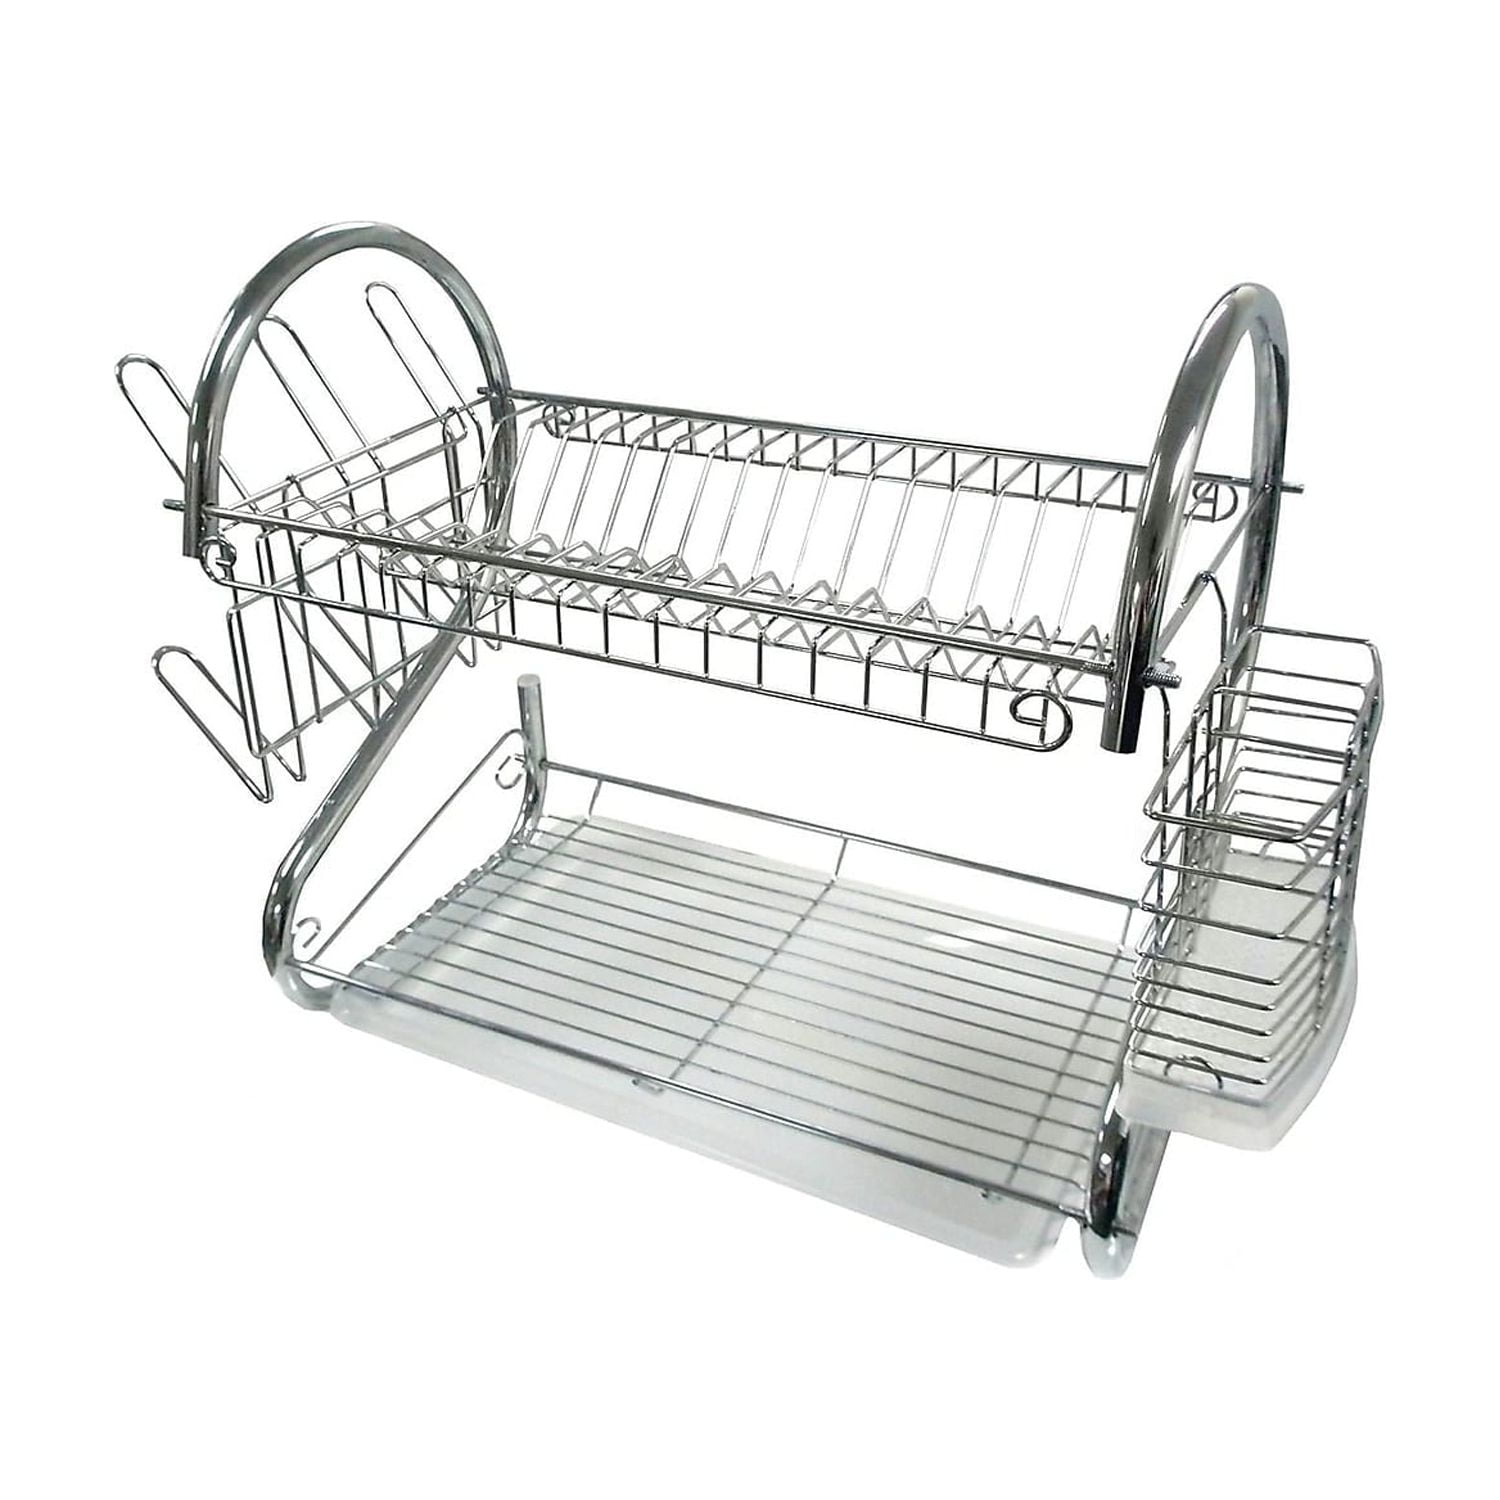 Better Chef 16 Dish Rack 2-Tier Red - Curacao 